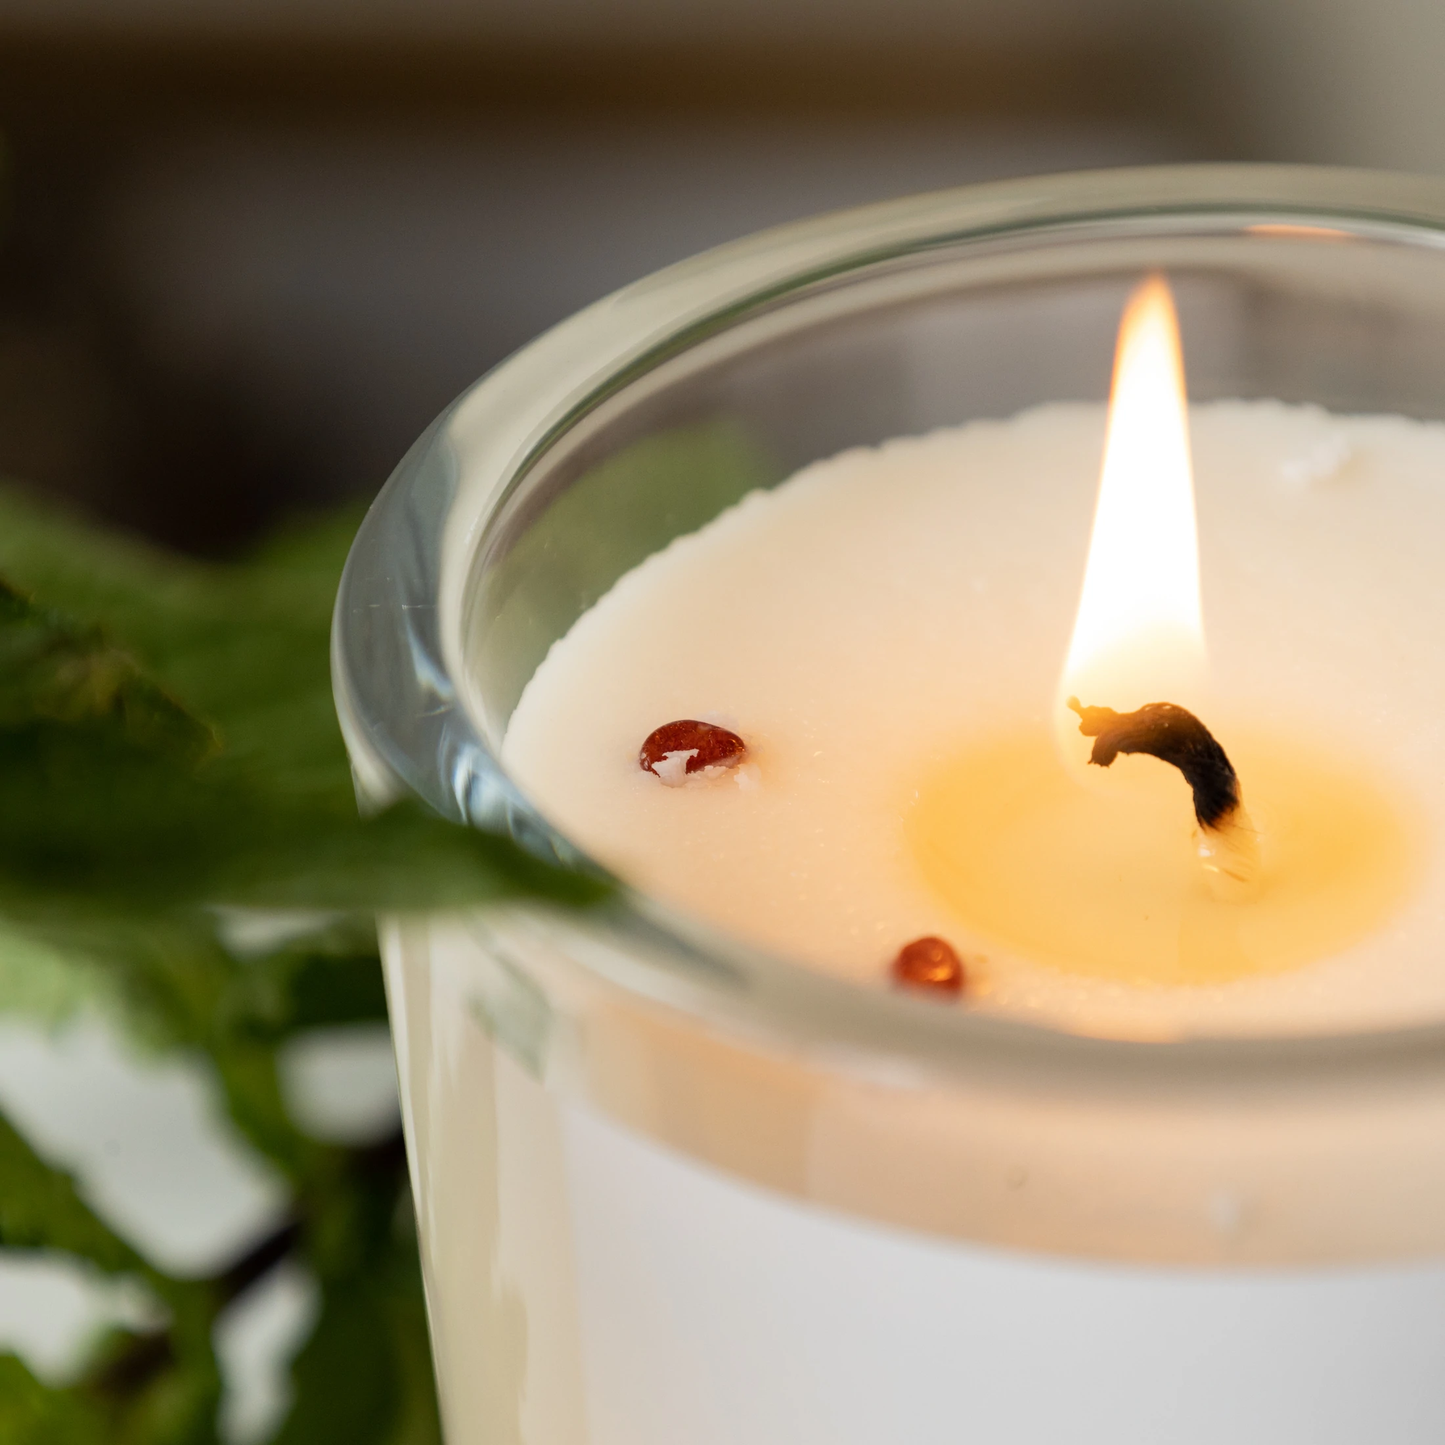 Baltic Amber Essential Oil Candle